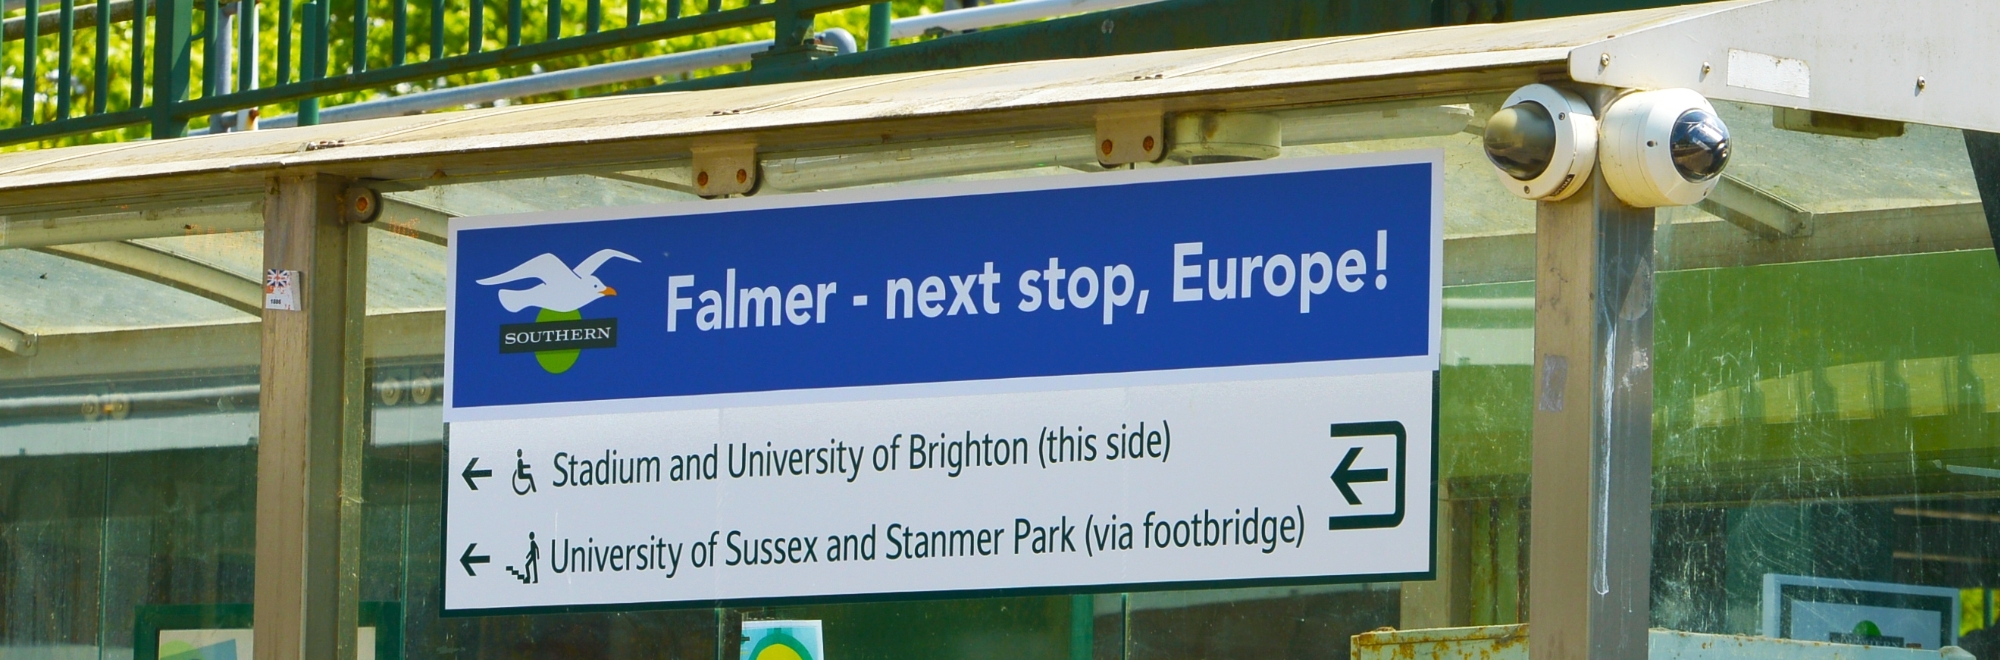 Sussex train station transformed to support Europe-bound Seagulls